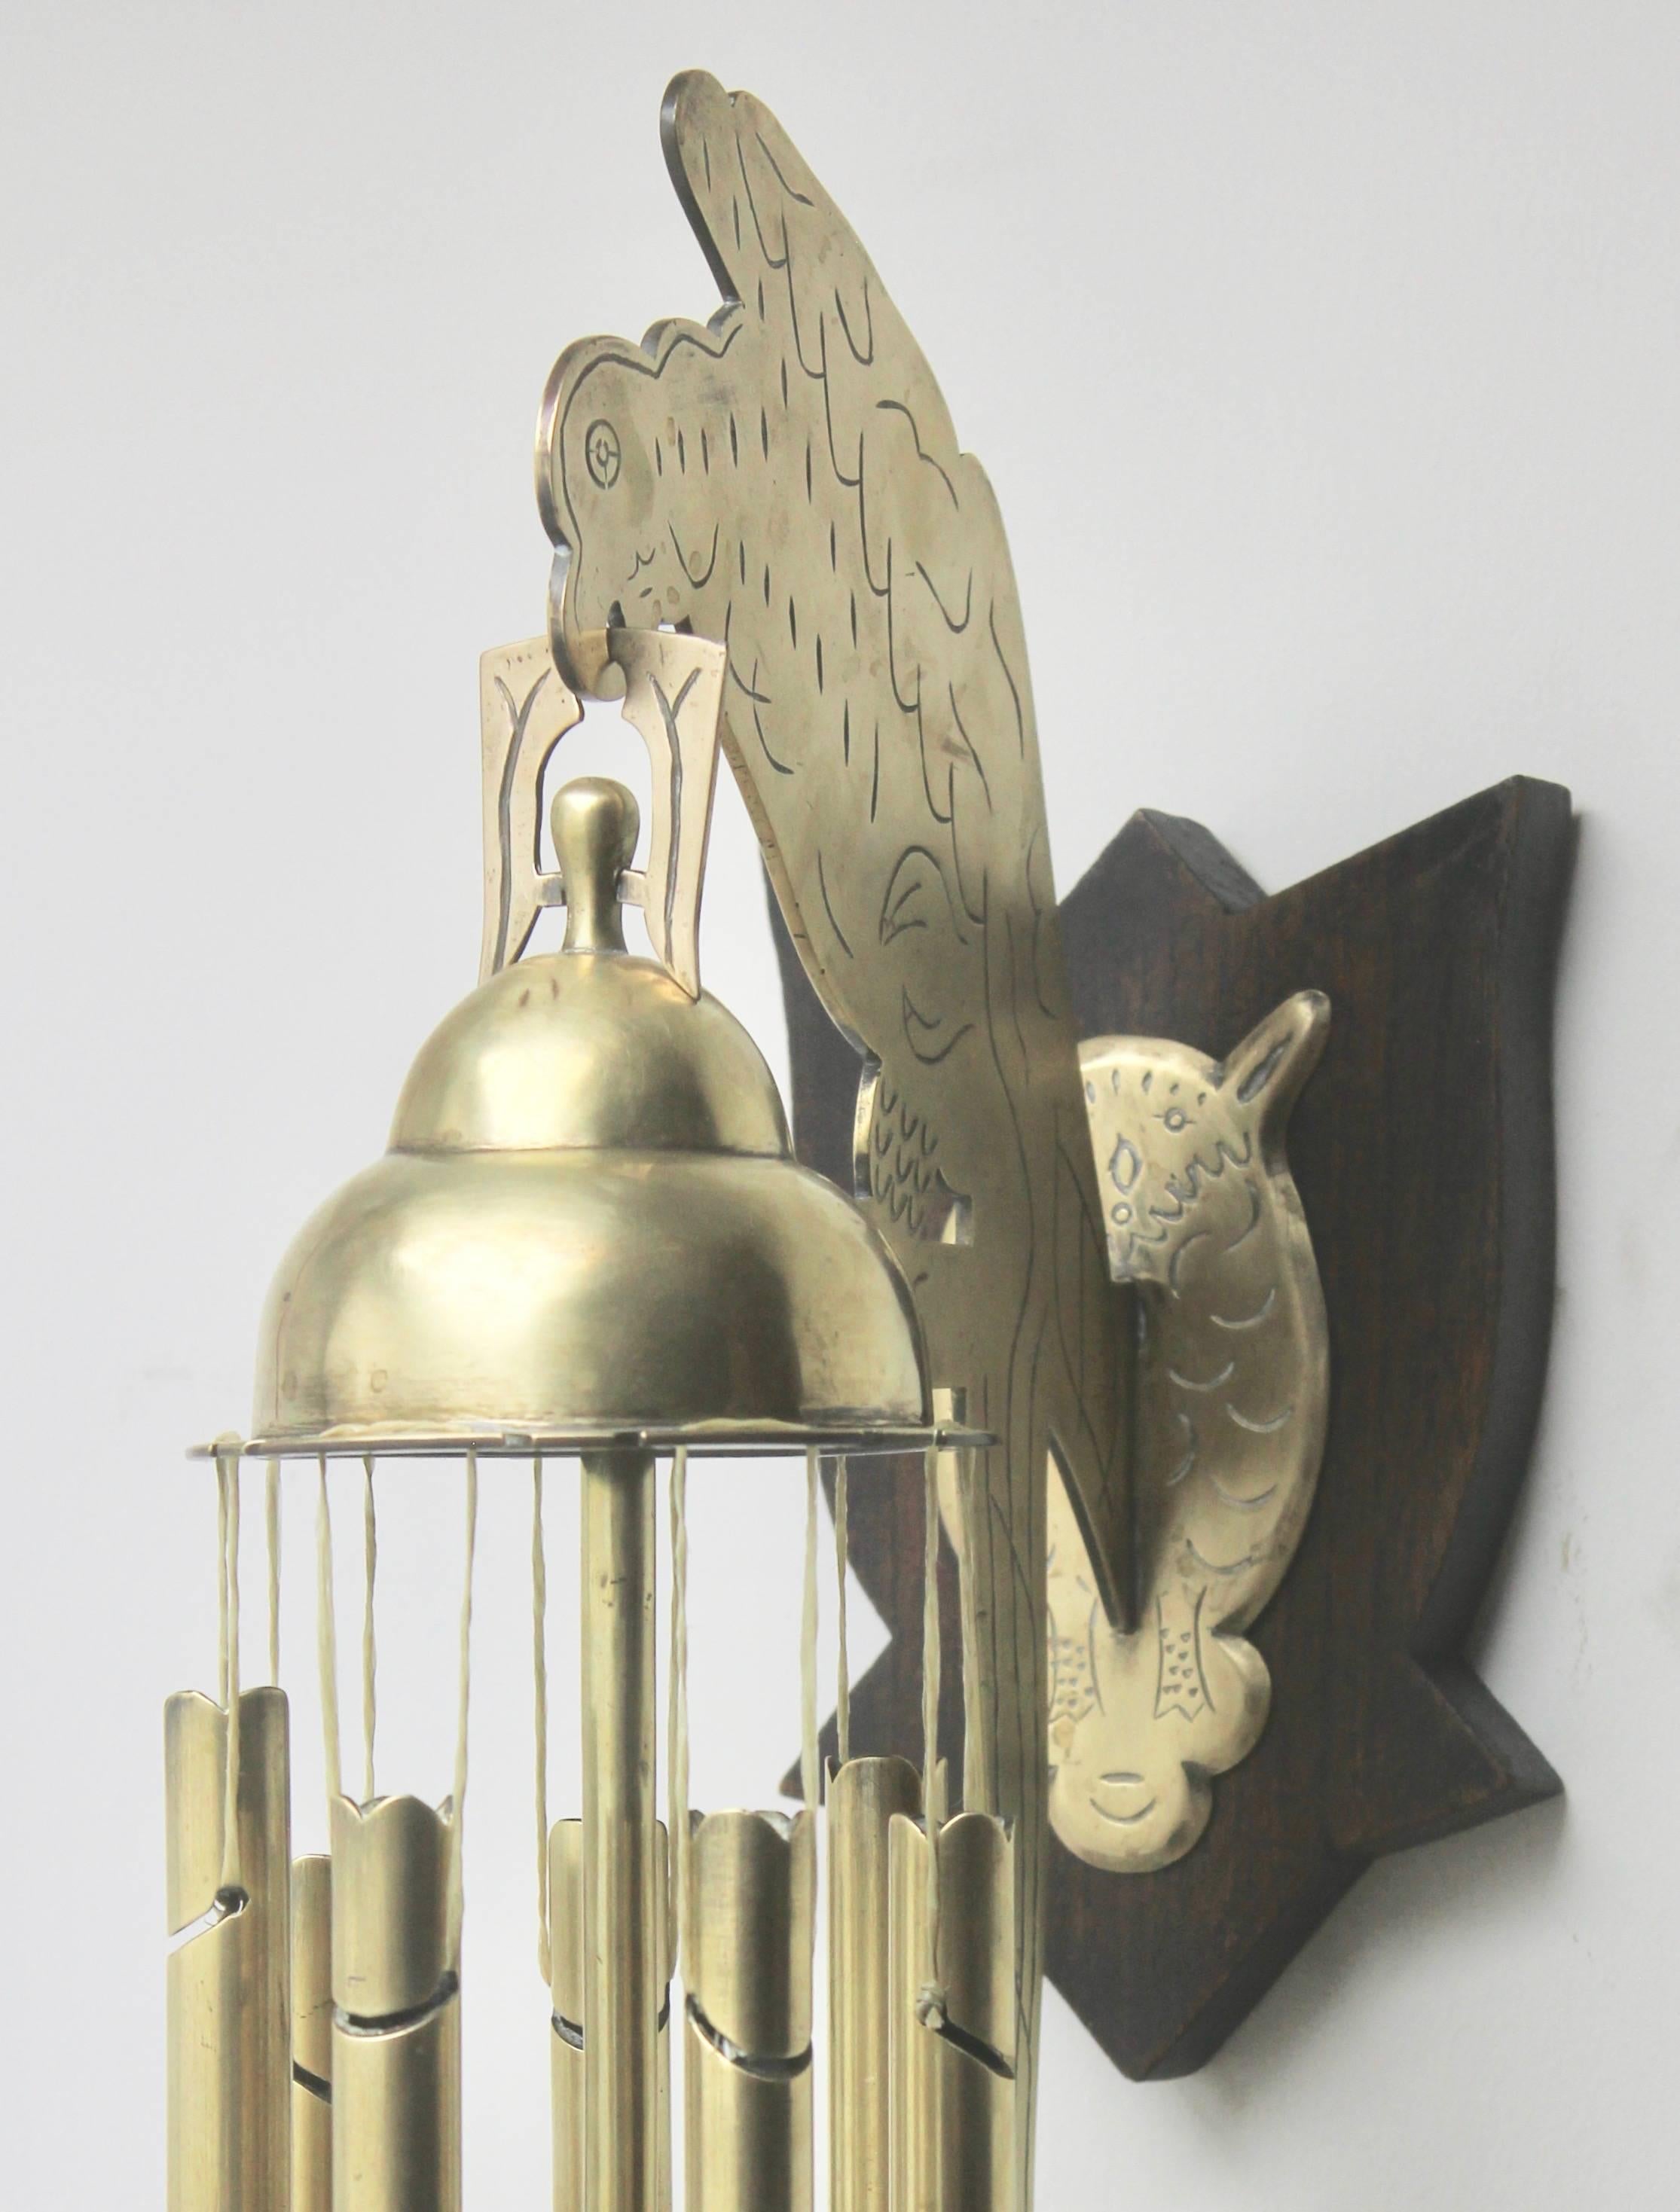 Early 20th Century Arts & Crafts Chime Tubular Bells, Brass Wall-Mounted Dinner Gong ‘Doorbell’ For Sale